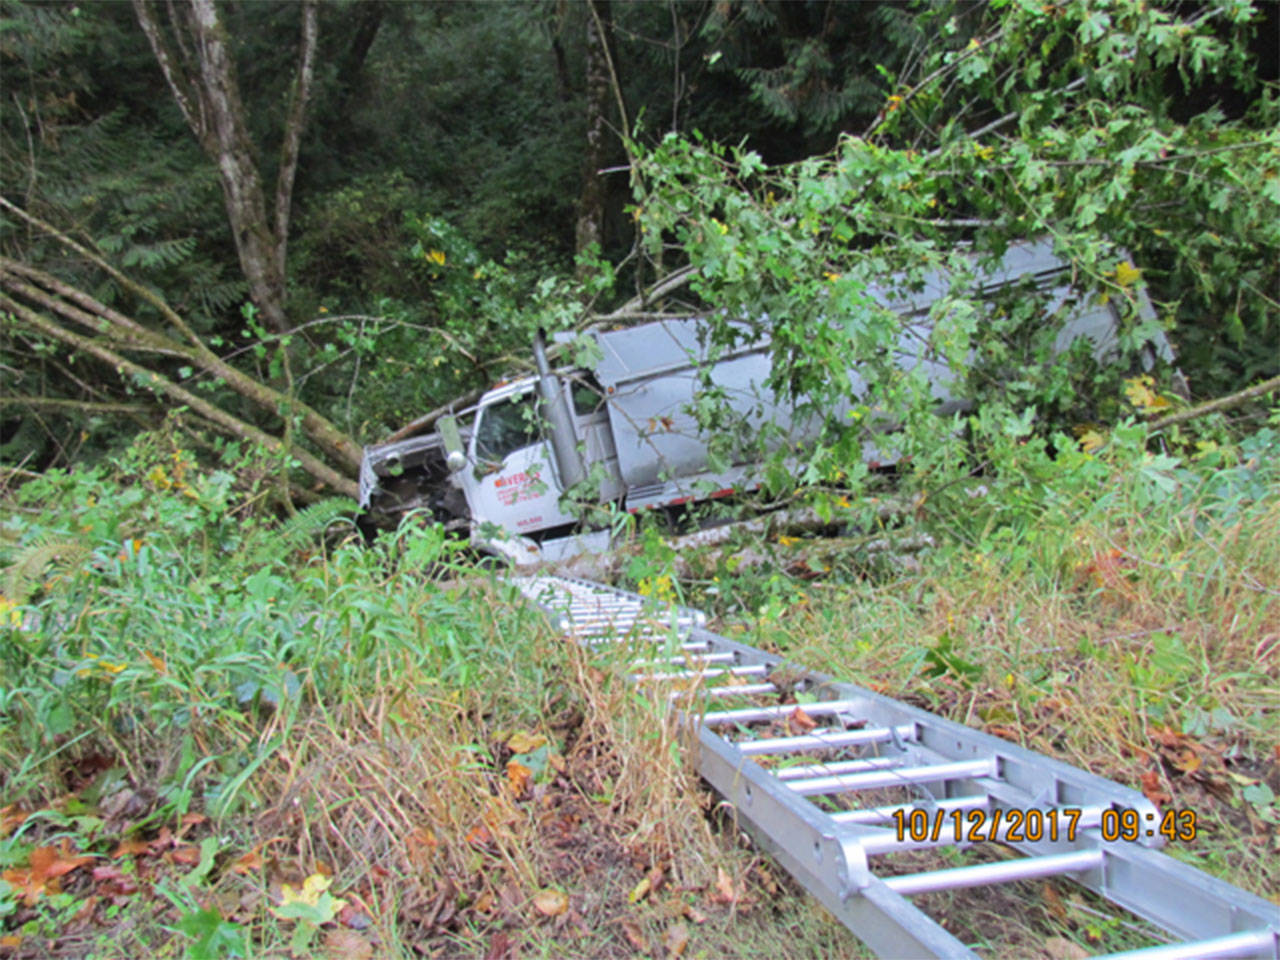 A dump truck rests about 20 feet down an embankment off Oak Bay Road in Port Ludlow on Friday. (Port Ludlow Fire & Rescue)